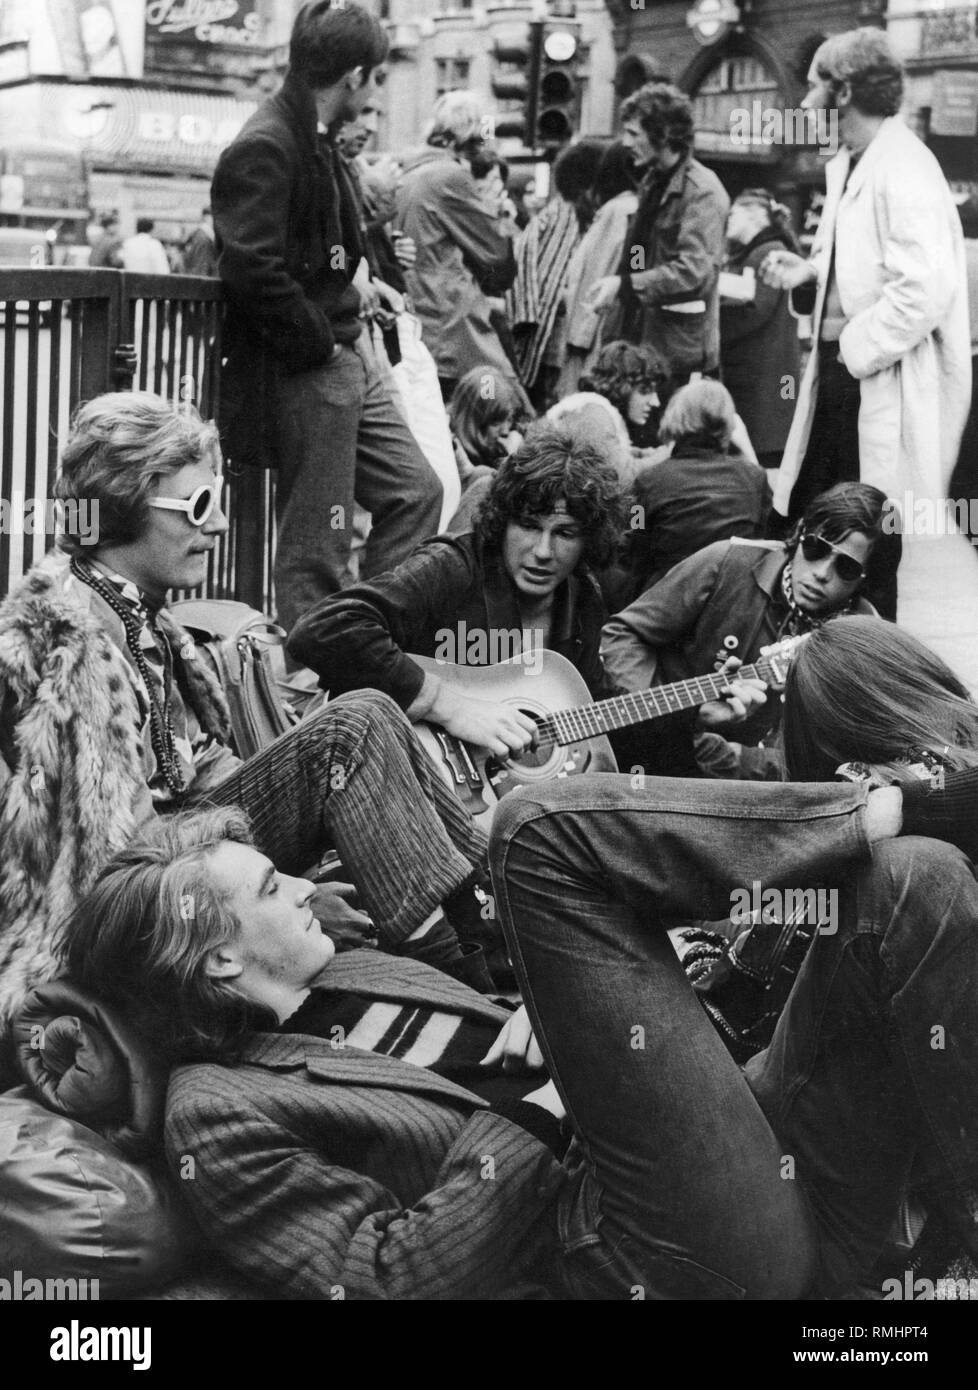 Young 'bums' on the ground, near a subway station in London. Stock Photo